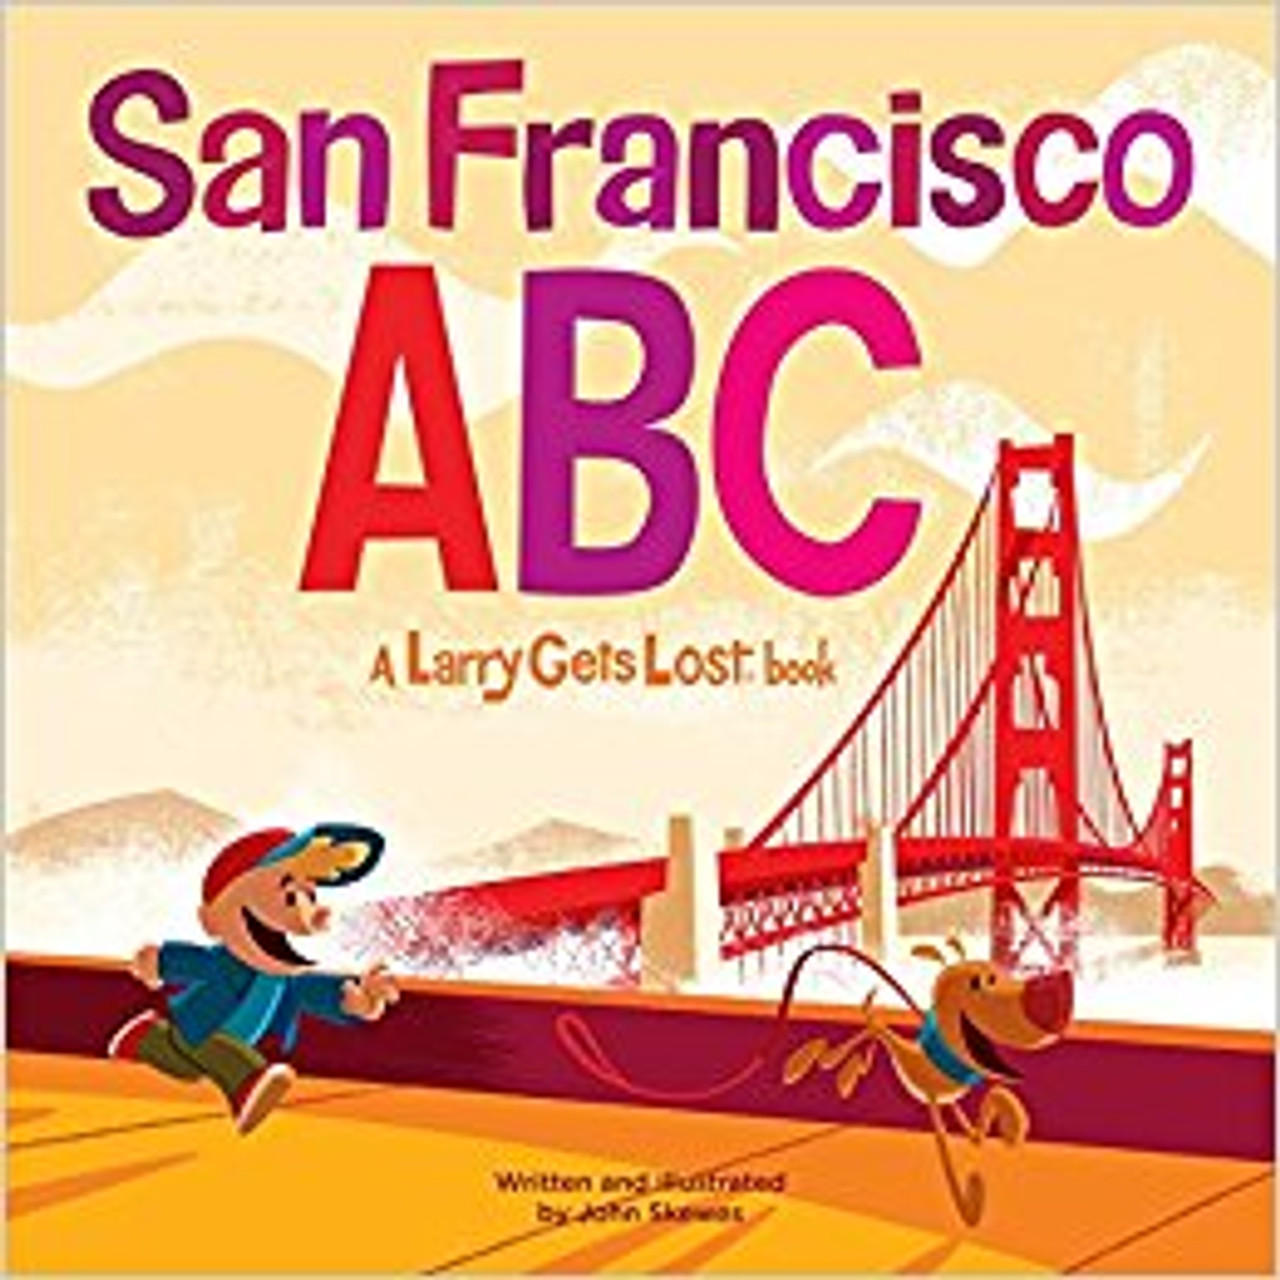 : Discover San Francisco from A (Alcatraz) to Z (The San Francisco Zoo), and everything in between! G is for the Golden Gate Bridge, L is for Lombard Street, and W is for the Wharf. Kids will have fun discovering the city as they learn their ABCs. In this companion to the best-selling "Larry Gets Lost in San Francisco," the dog, Larry, and his owner, Pete, take an alphabetical journey through the City by the Bay.